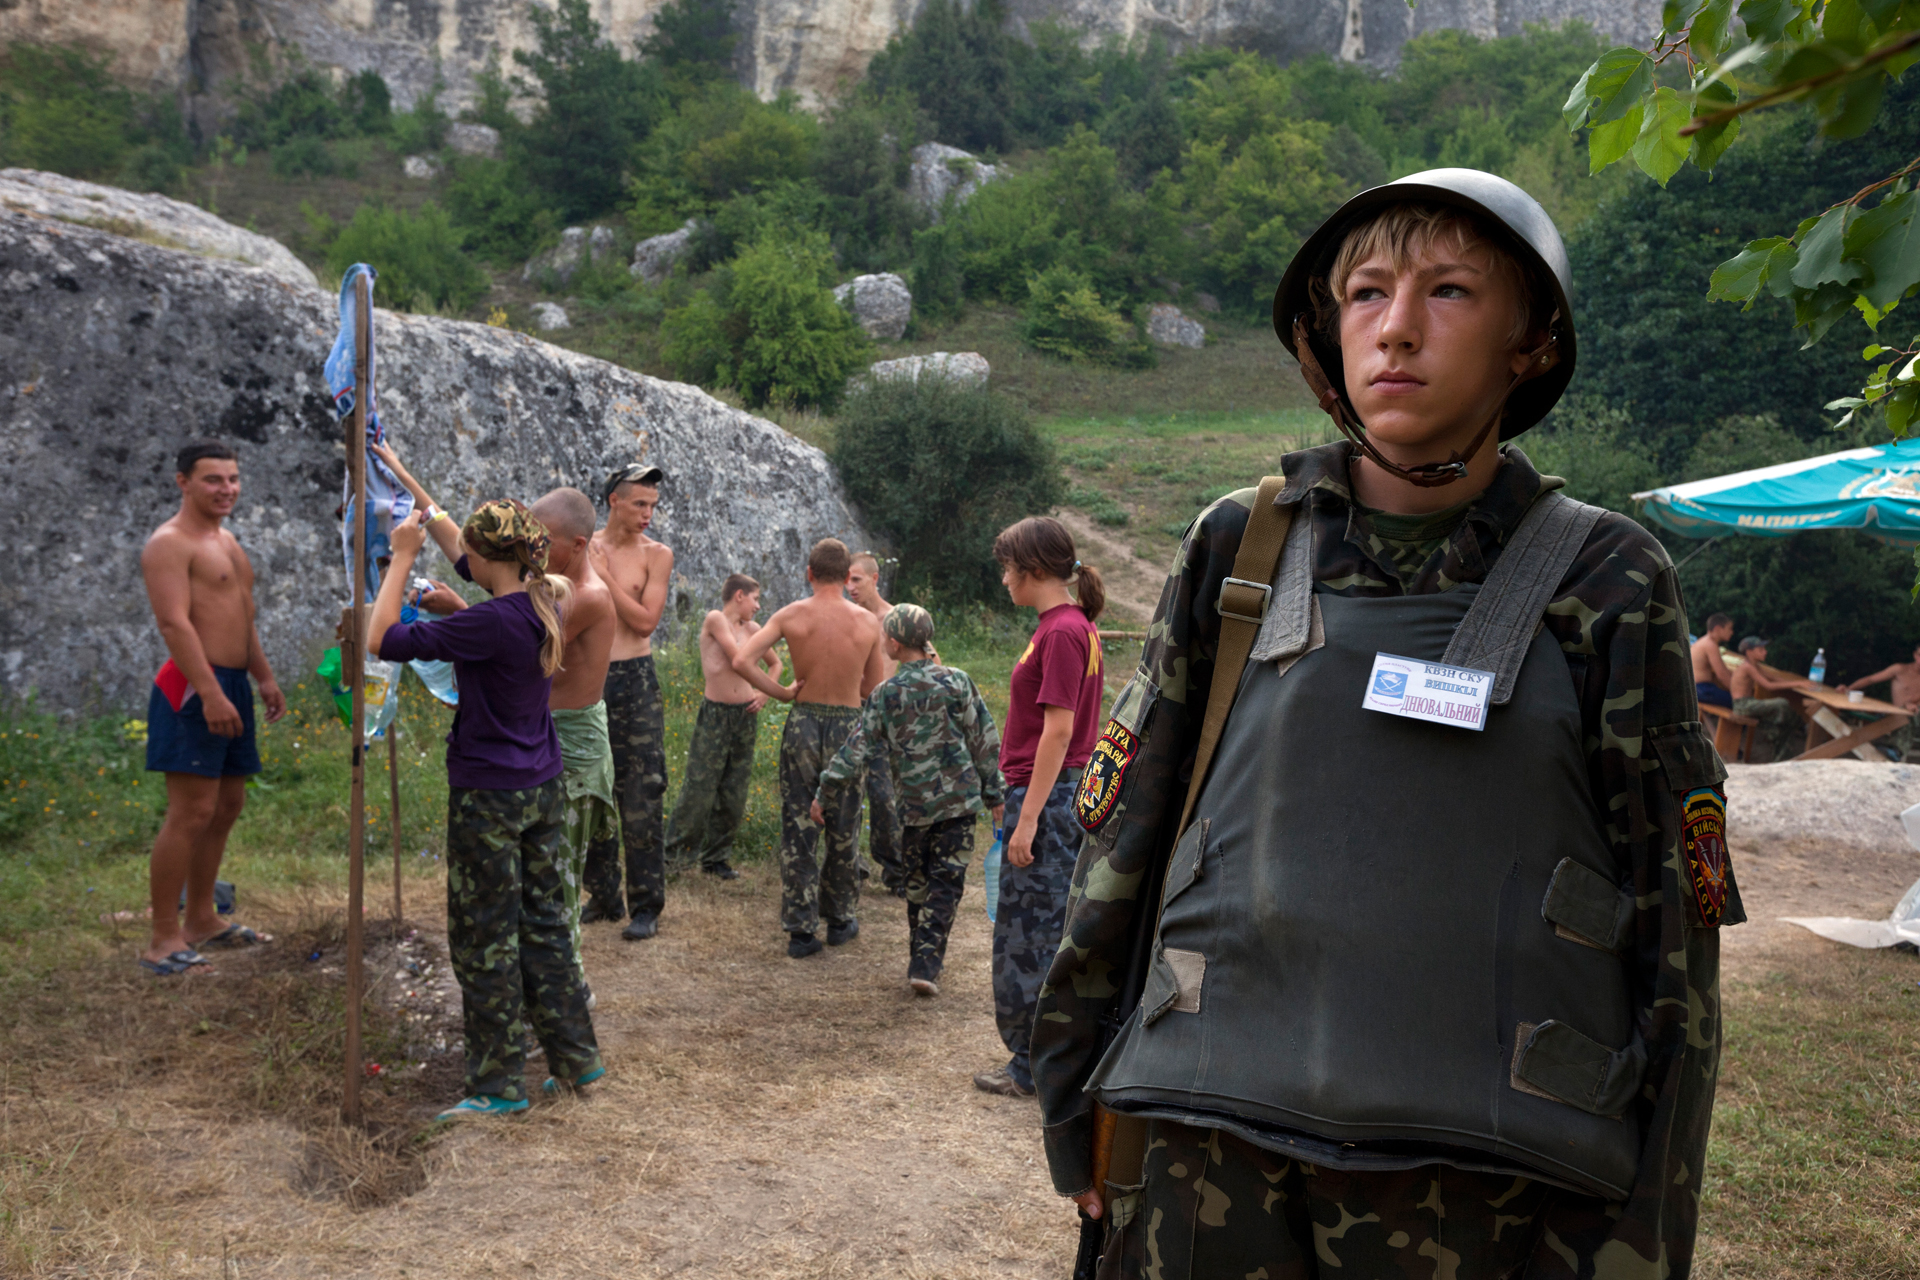  An armed child patrols the entrance to a camp for children aged 8-16, while his peers take care of their morning hygiene.  Eski-Kermen Region, Crimea  